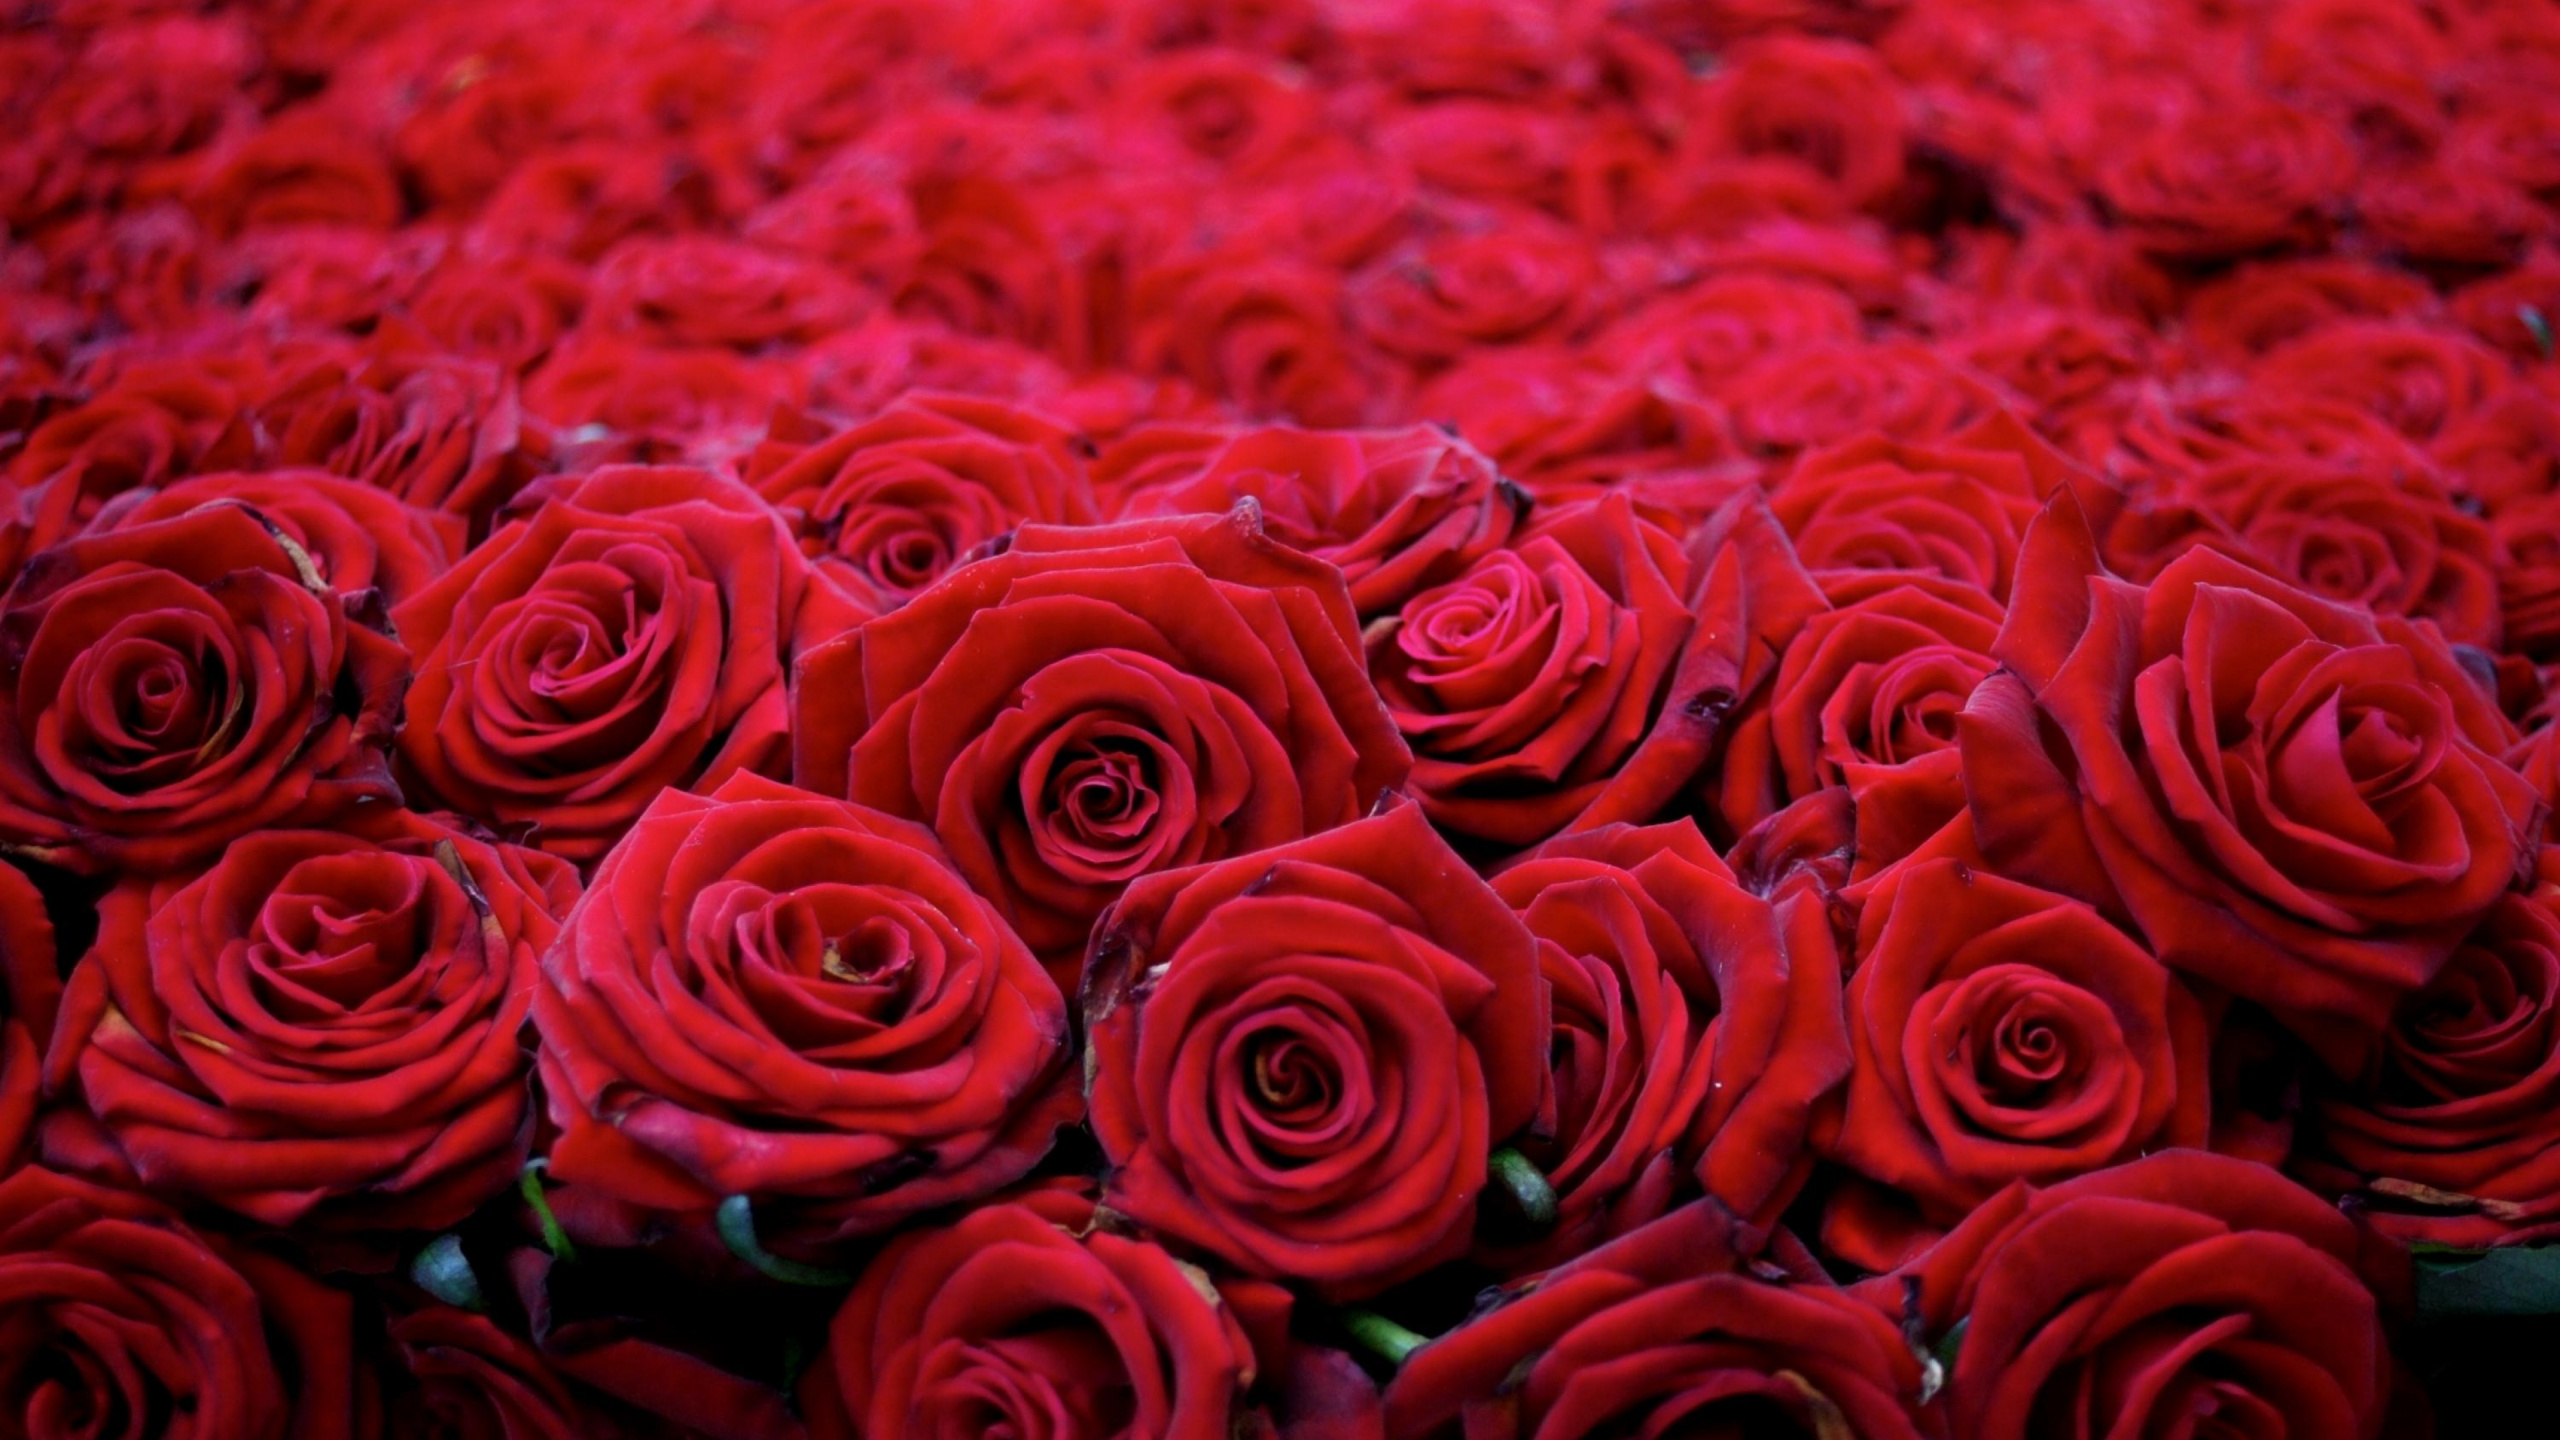 Red Roses on Red Textile. Wallpaper in 2560x1440 Resolution